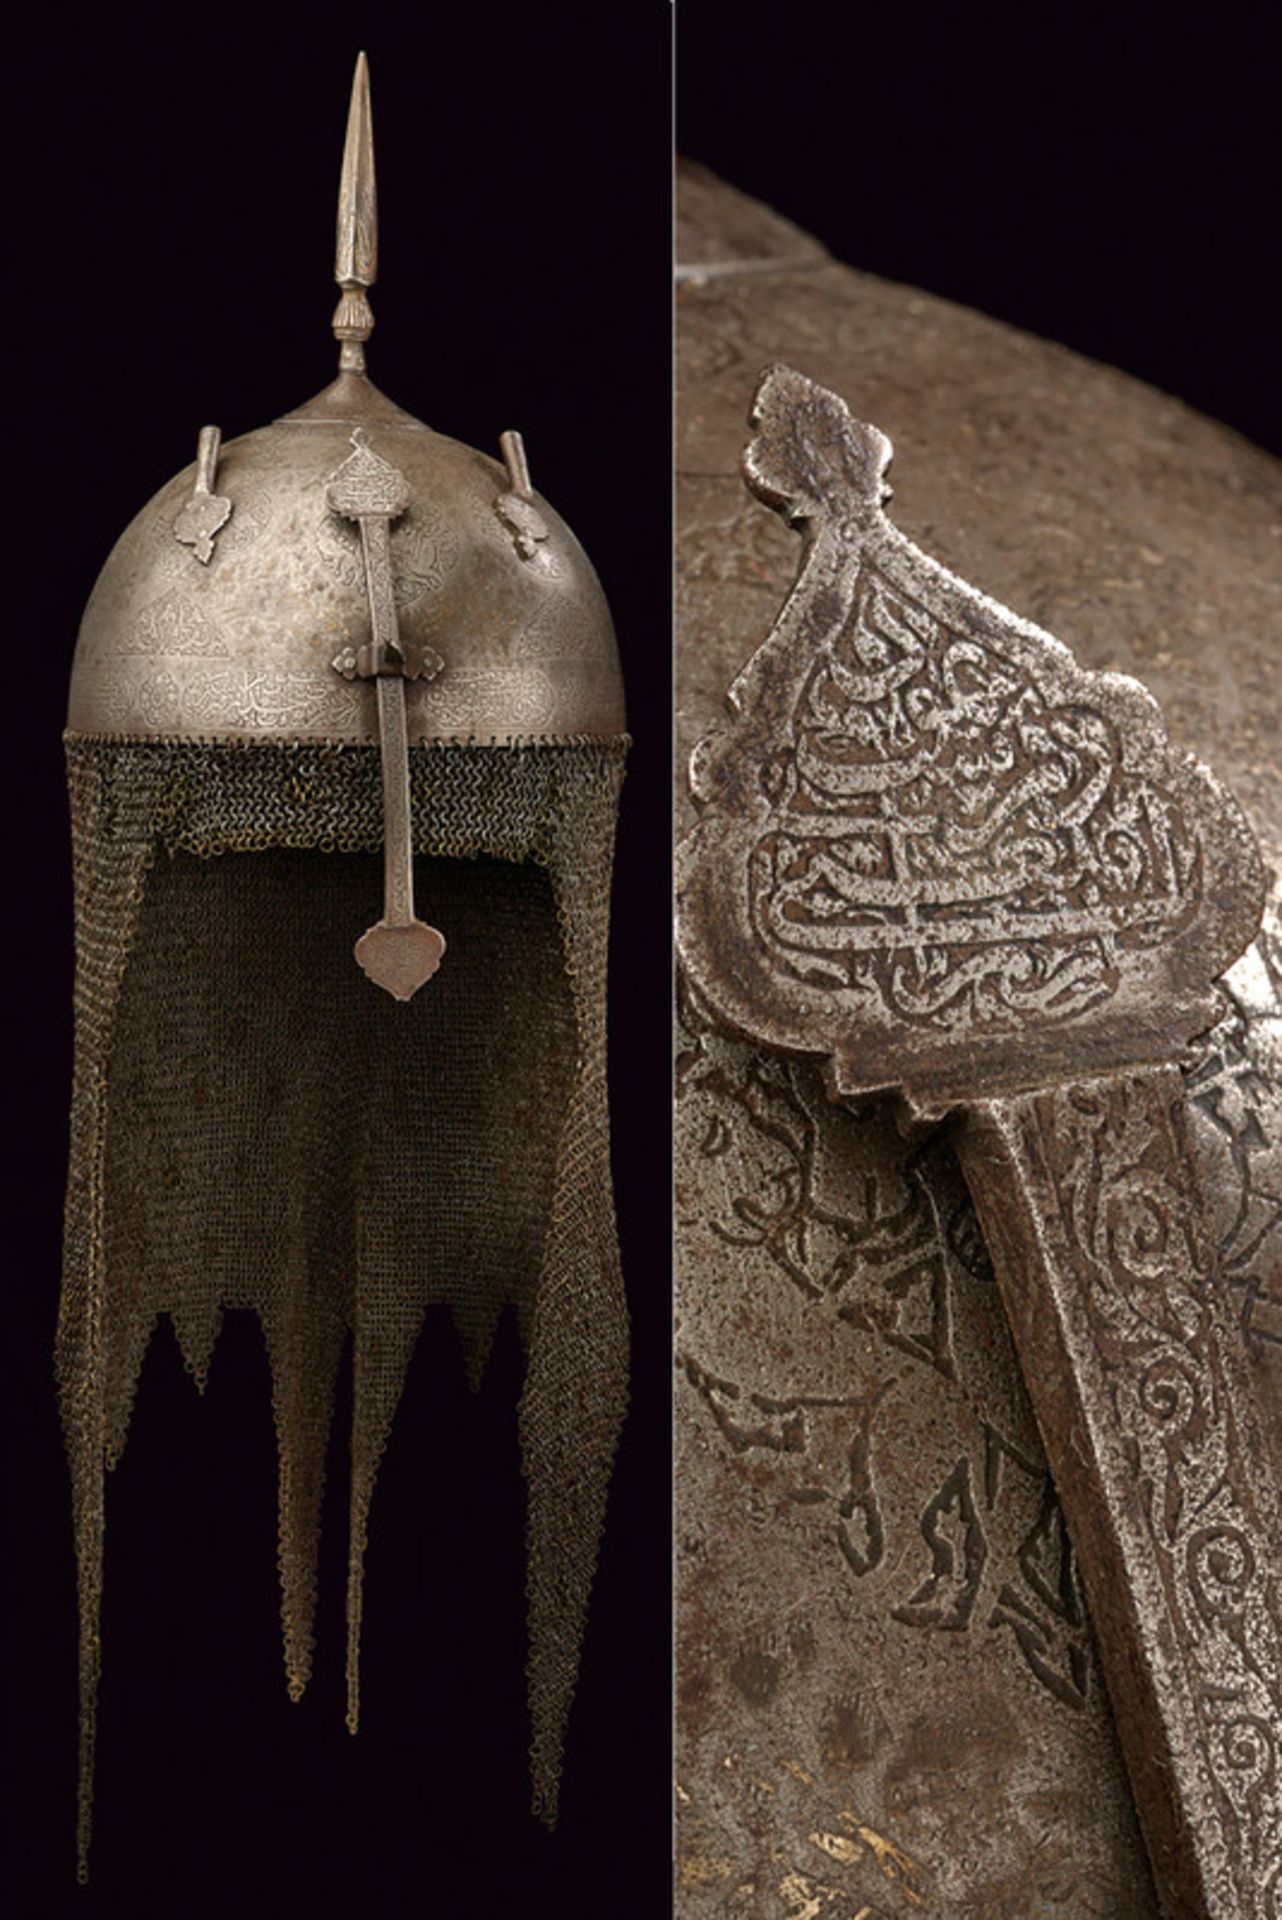 A khula-khud dating: 18th Century provenance: Persia Hemispherical, iron skull; decorated with